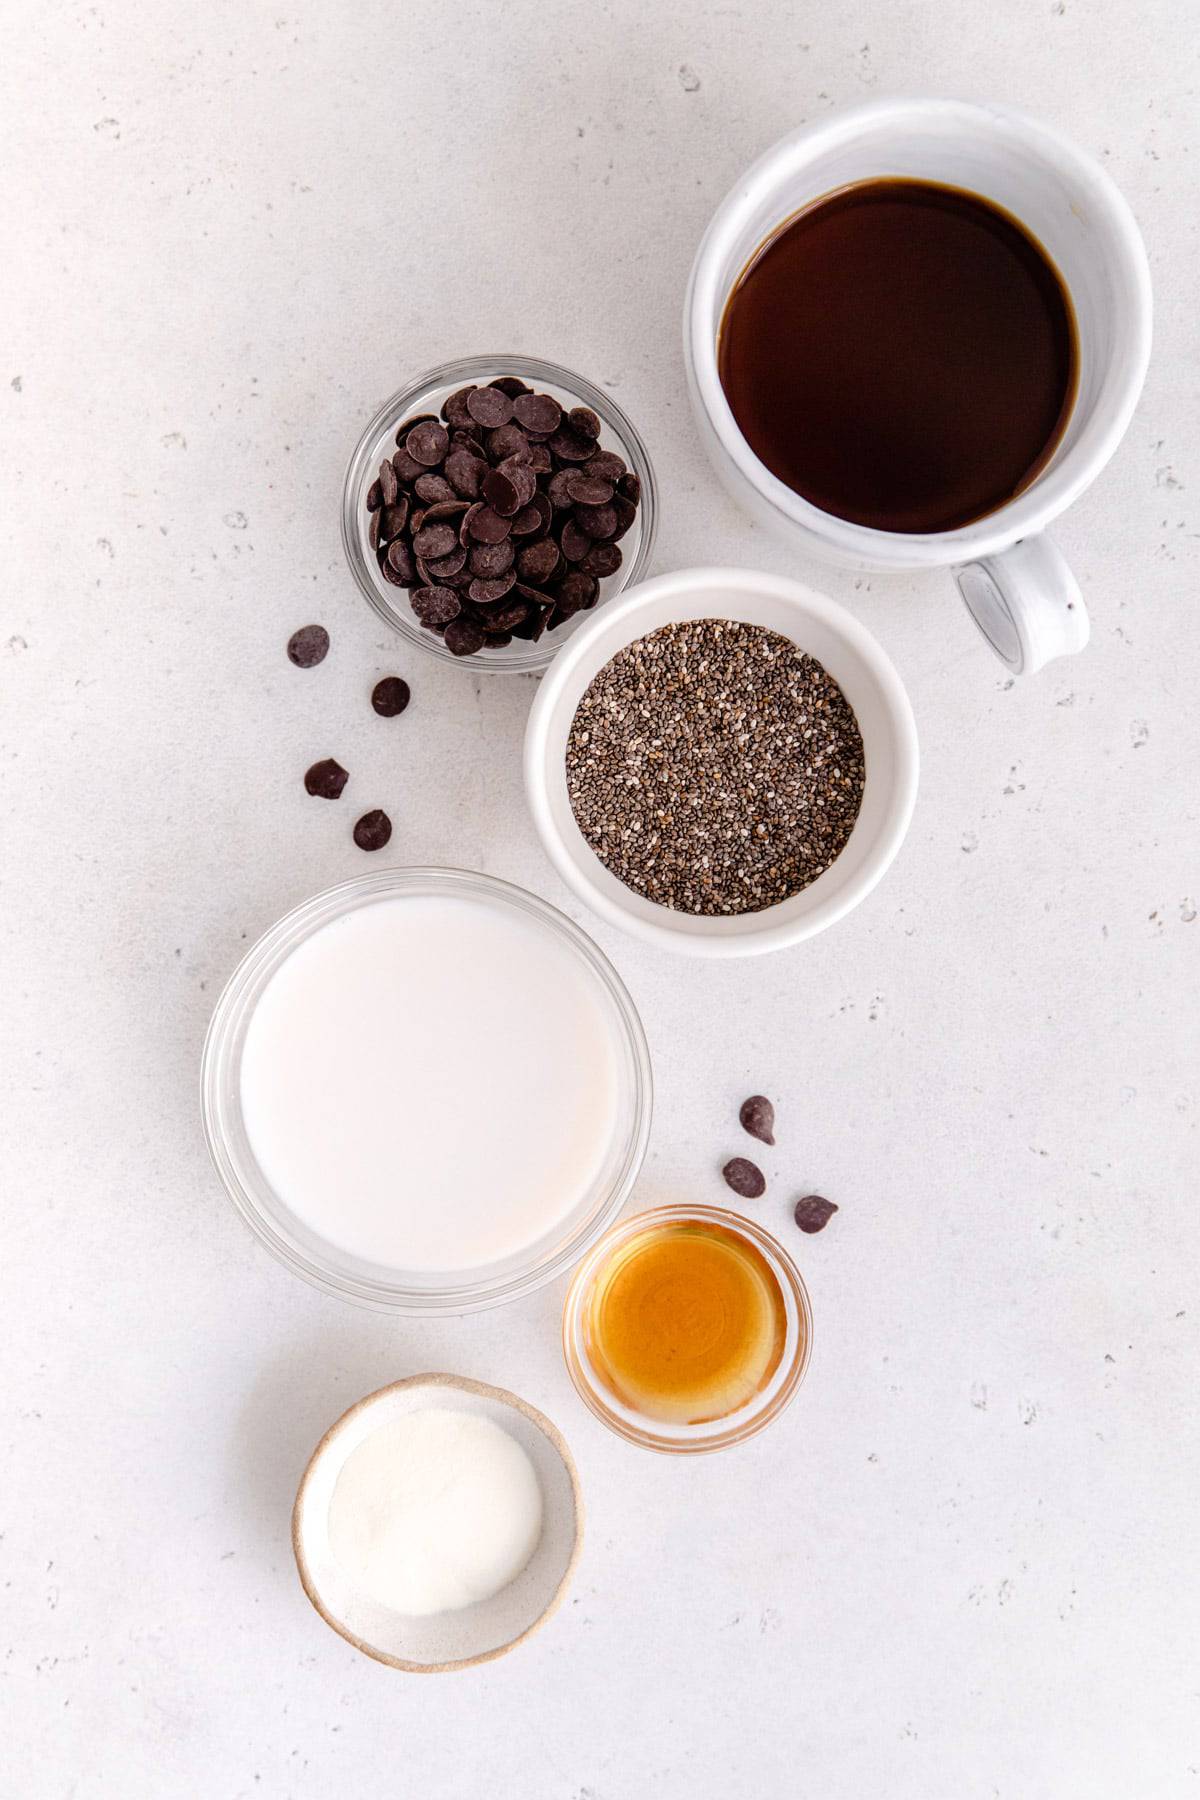 Ingredients for coffee chocolate chia seed pudding